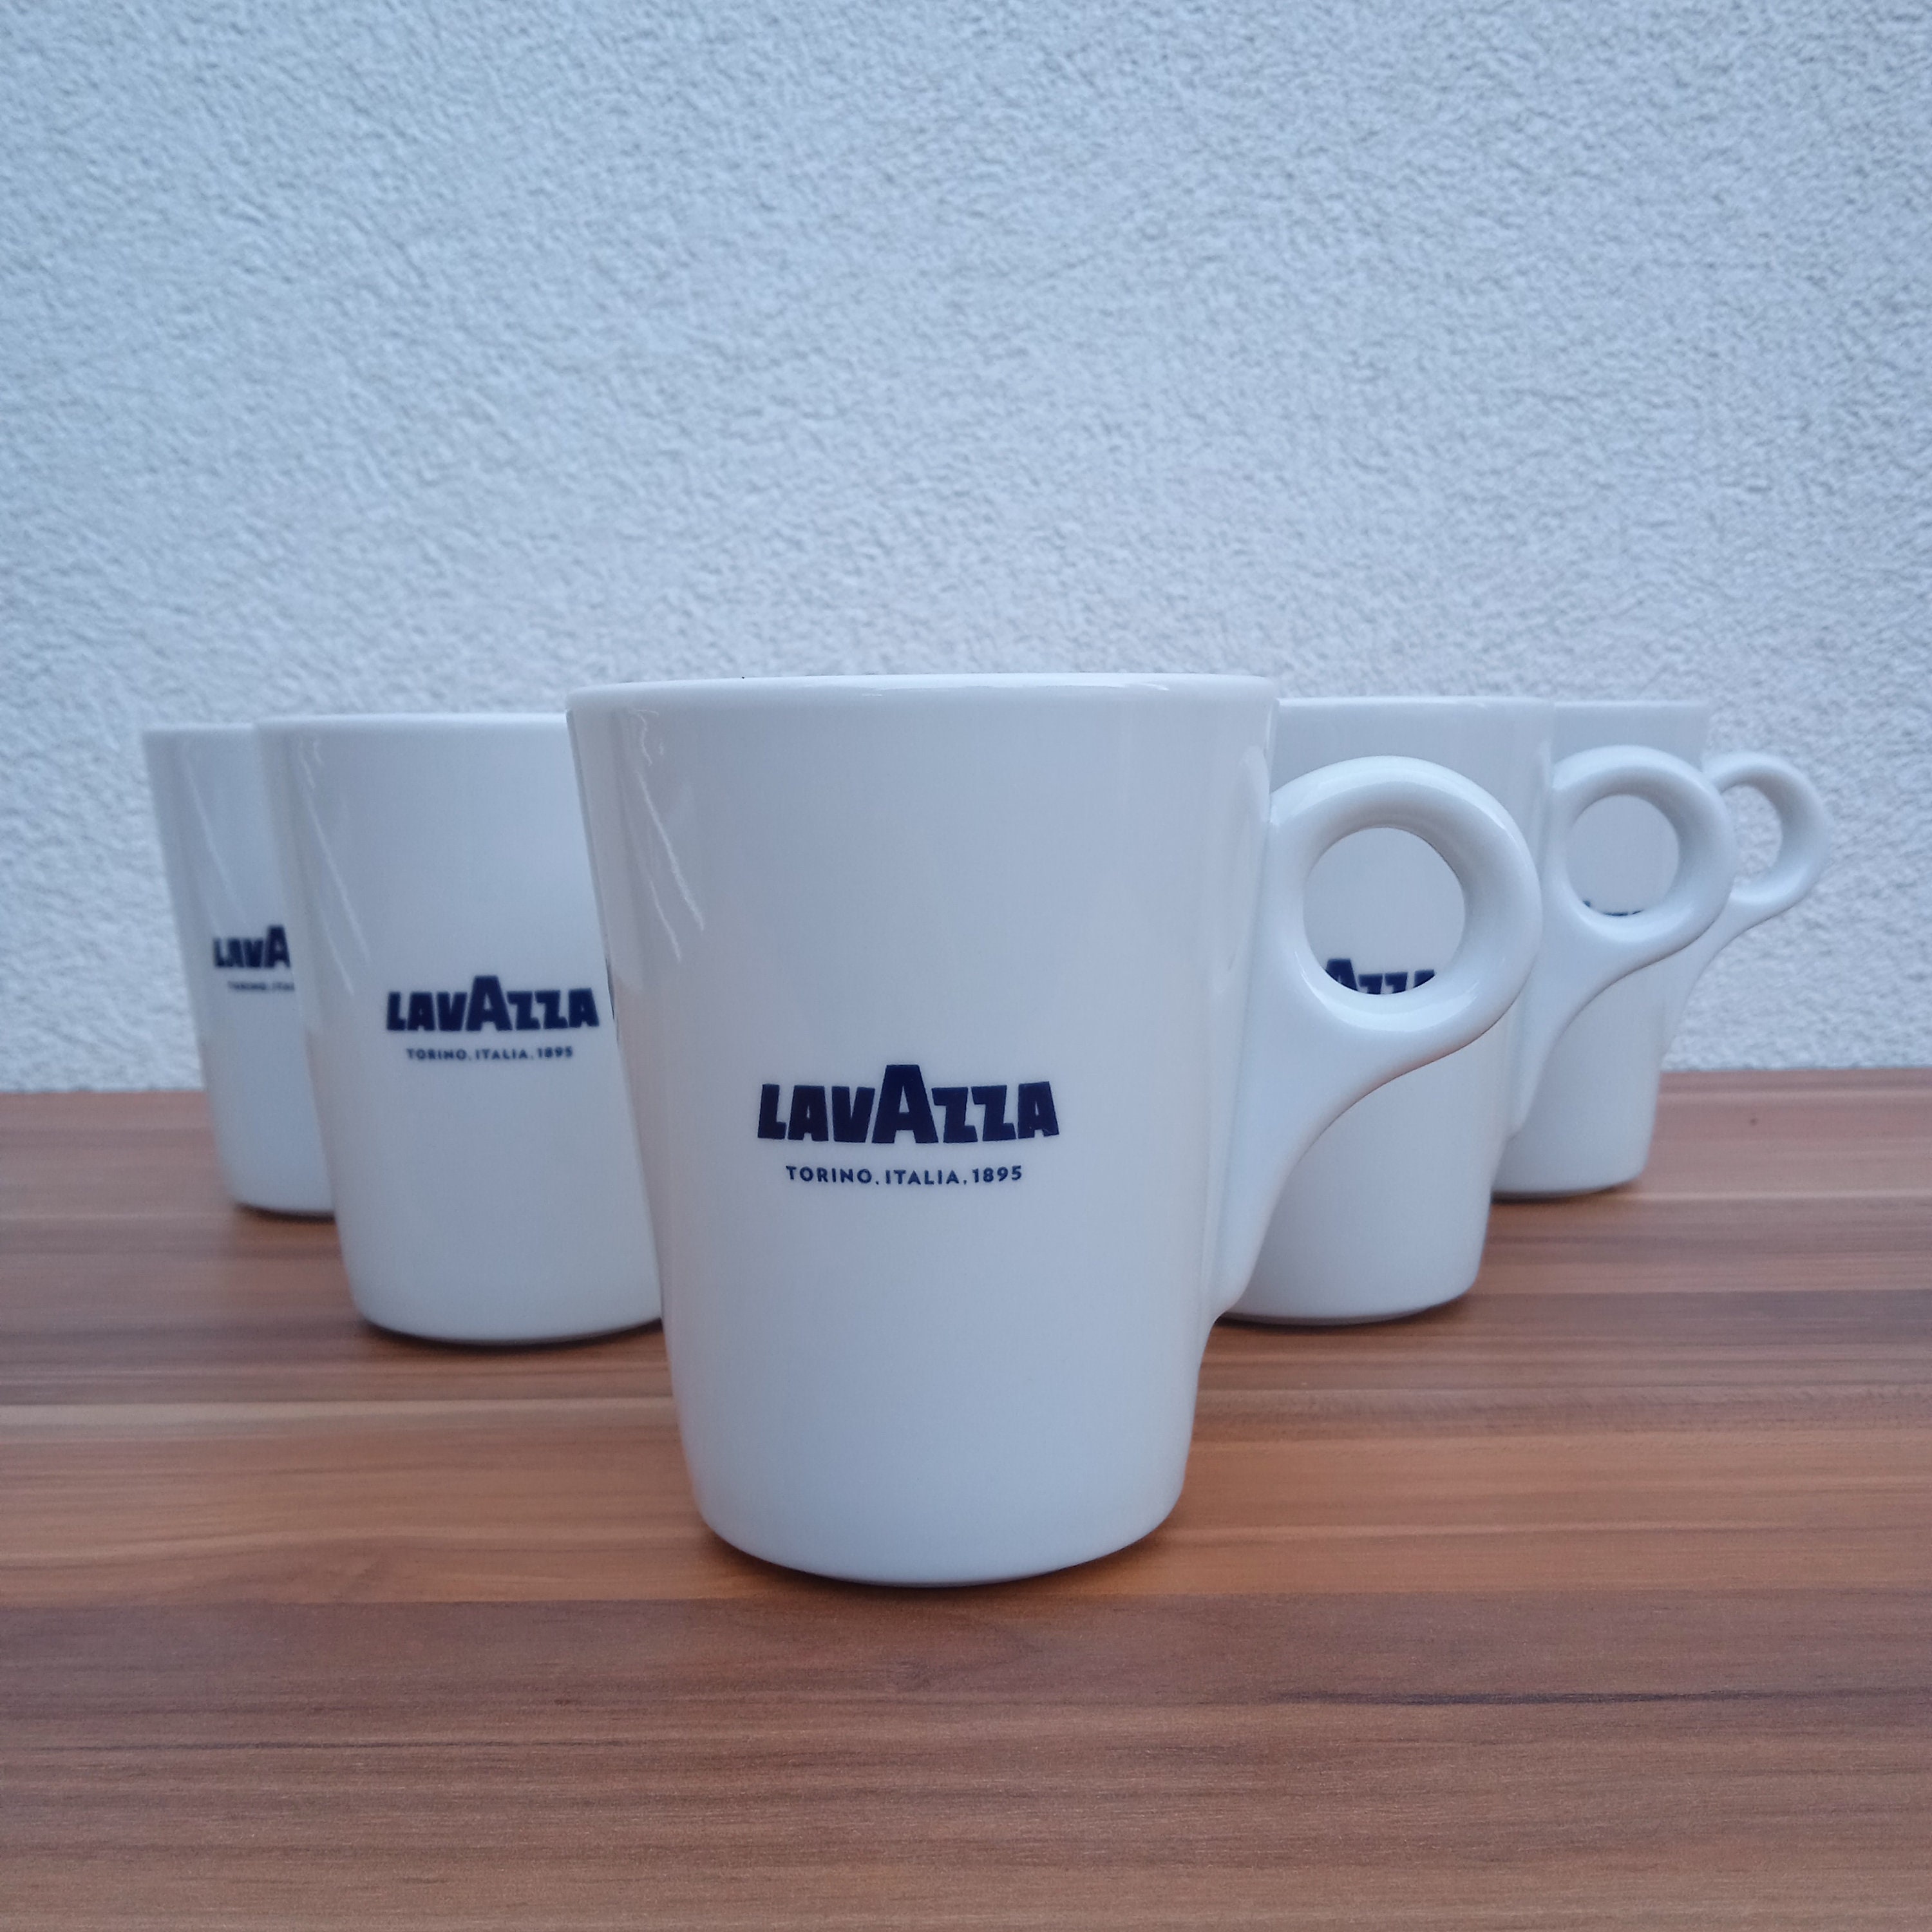 Lavazza Coffee White Blue Large Mug Cup 10 and 50 similar items